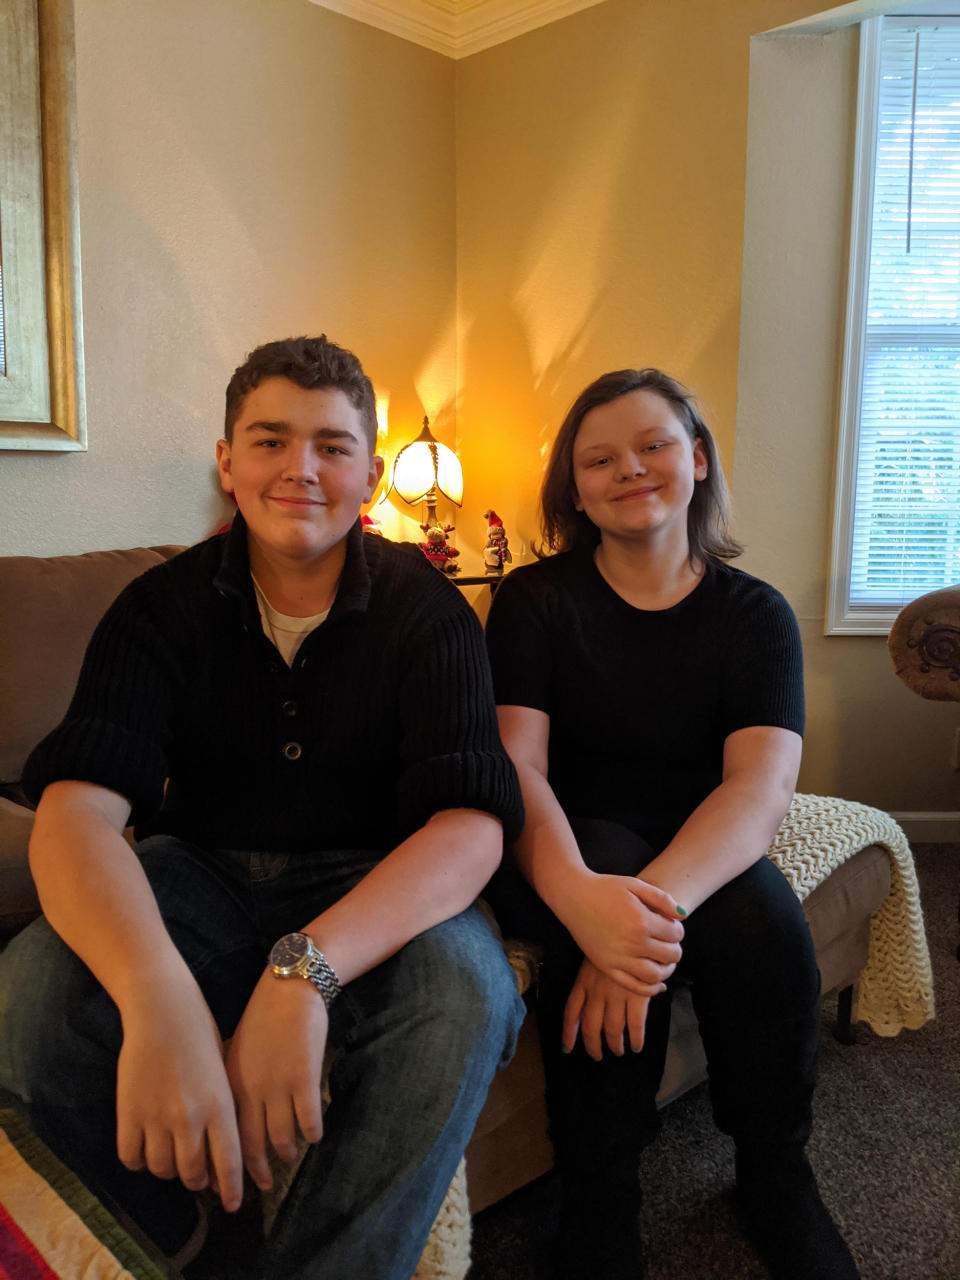 Anthony Lawson, 13, sits with his sister, Teddi, 12, for a photo at the end of 2019. (Theresa Lawson)